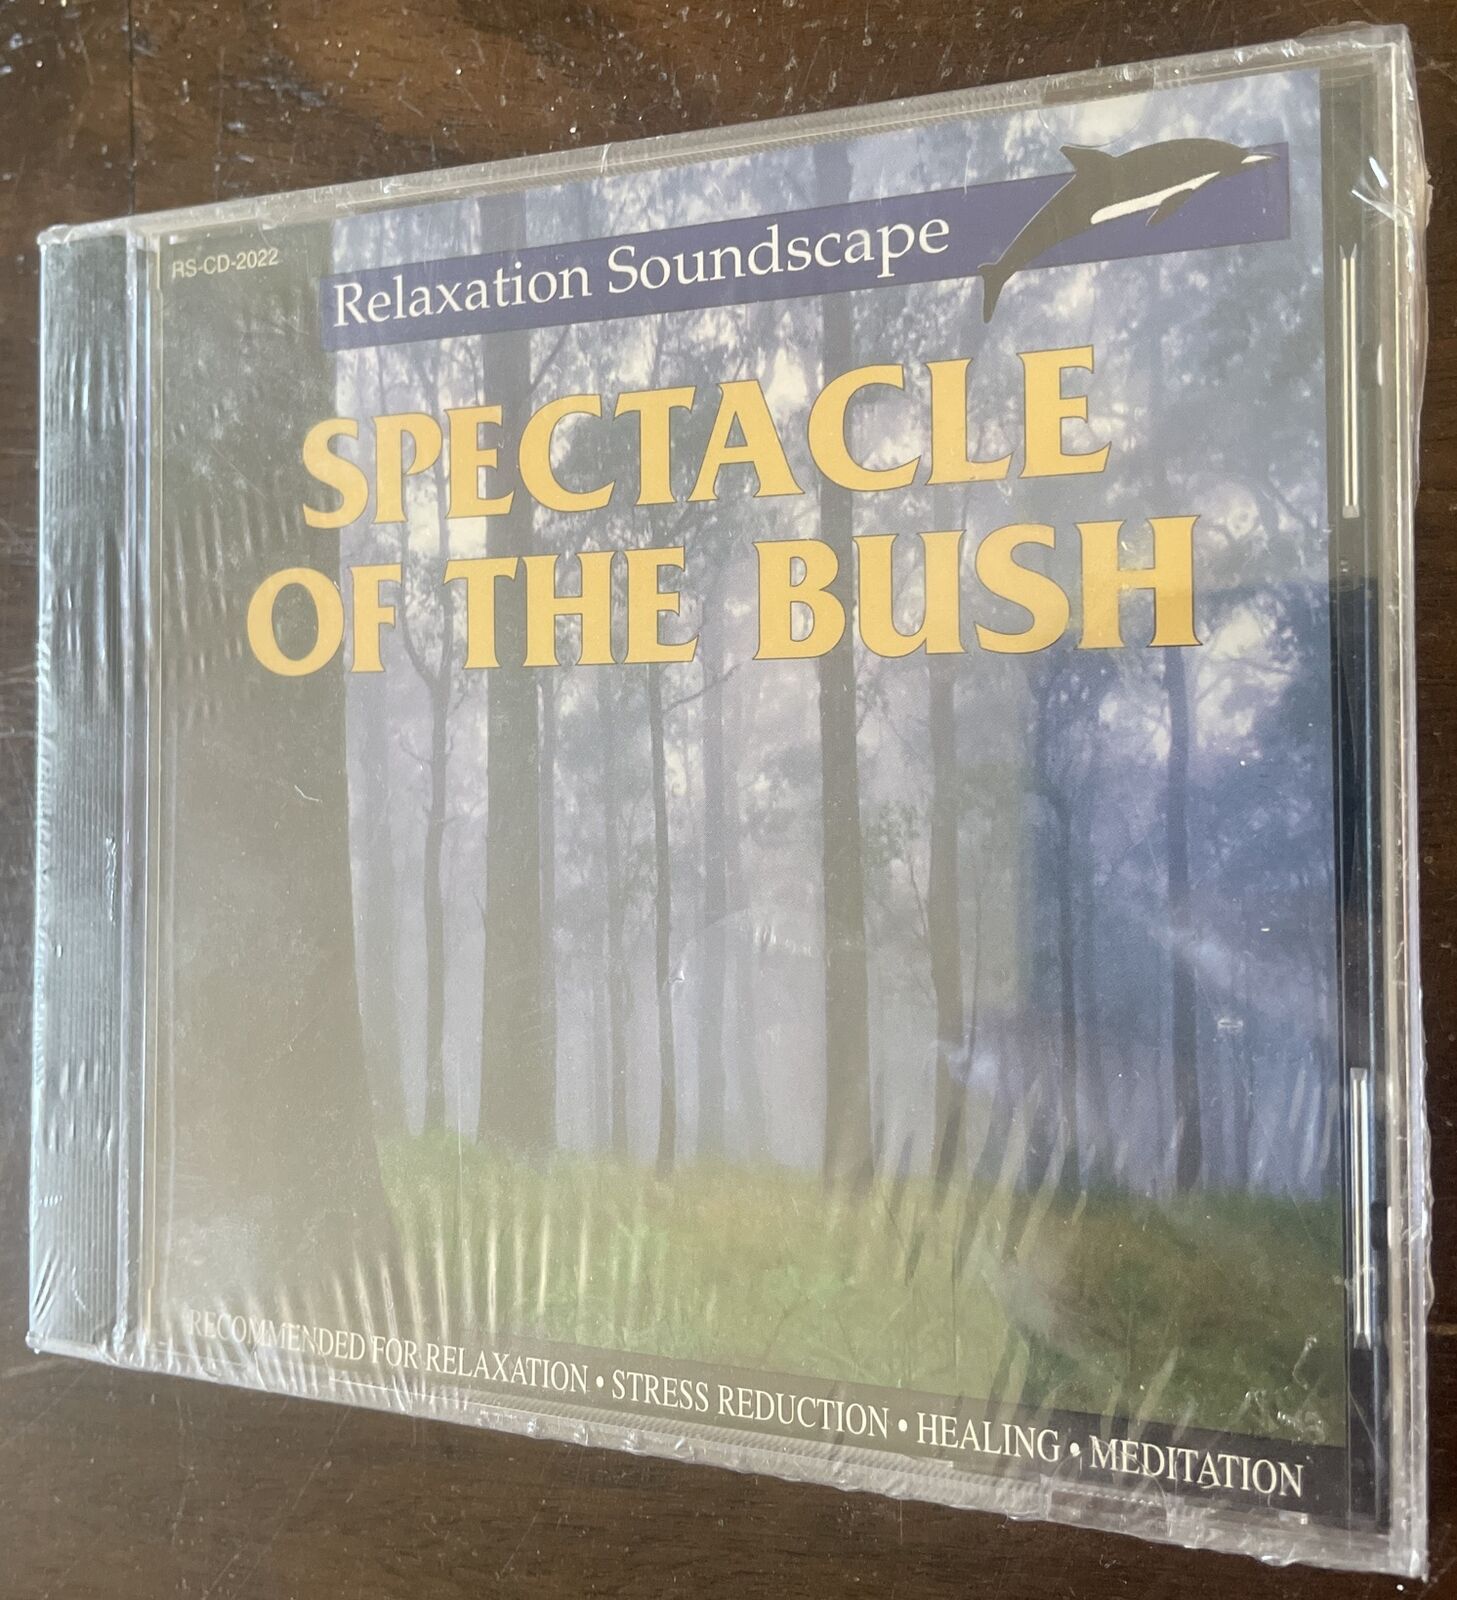 NEW SEALED CD - RELAXATION SOUNDSCAPE, SPECTACLE OF THE BUSH CD